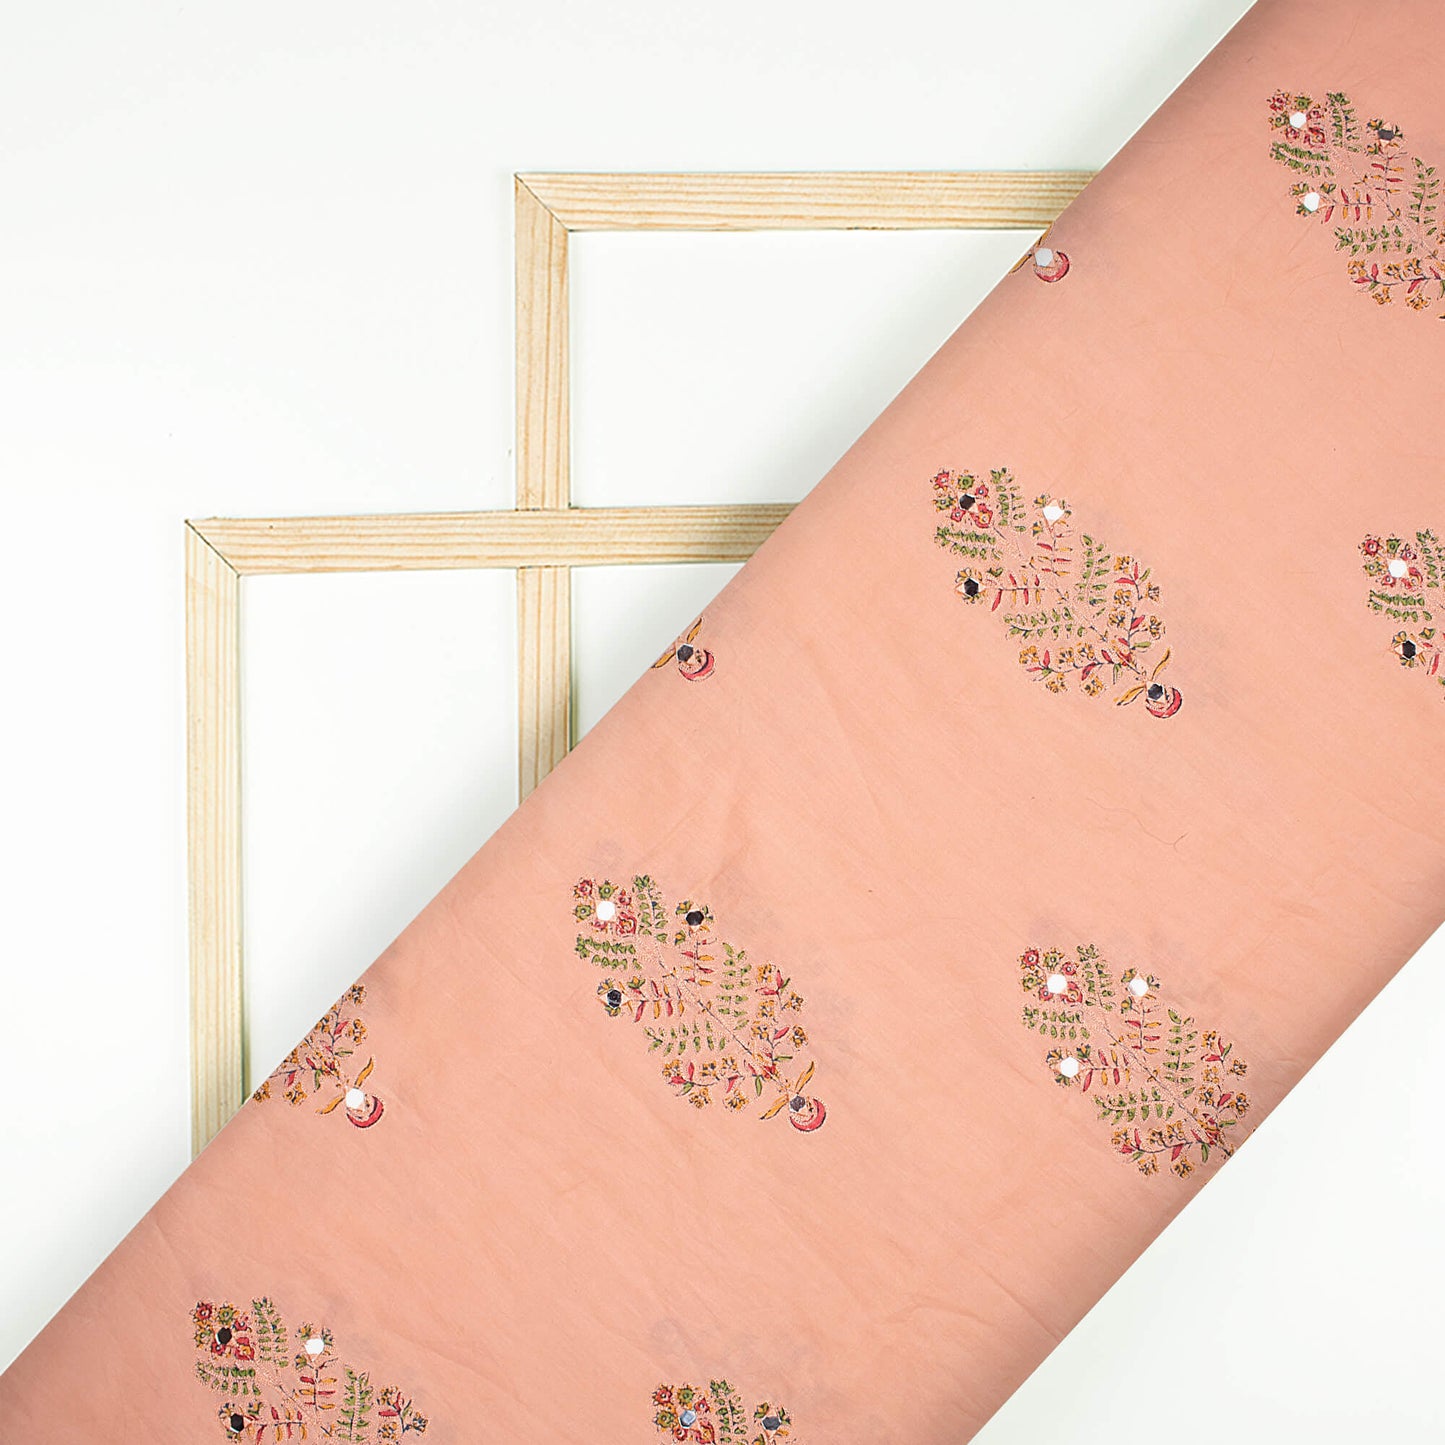 Peach And Green Floral Pattern Embroidery With Mirror Work Natural Dye Handblock Cotton Fabric